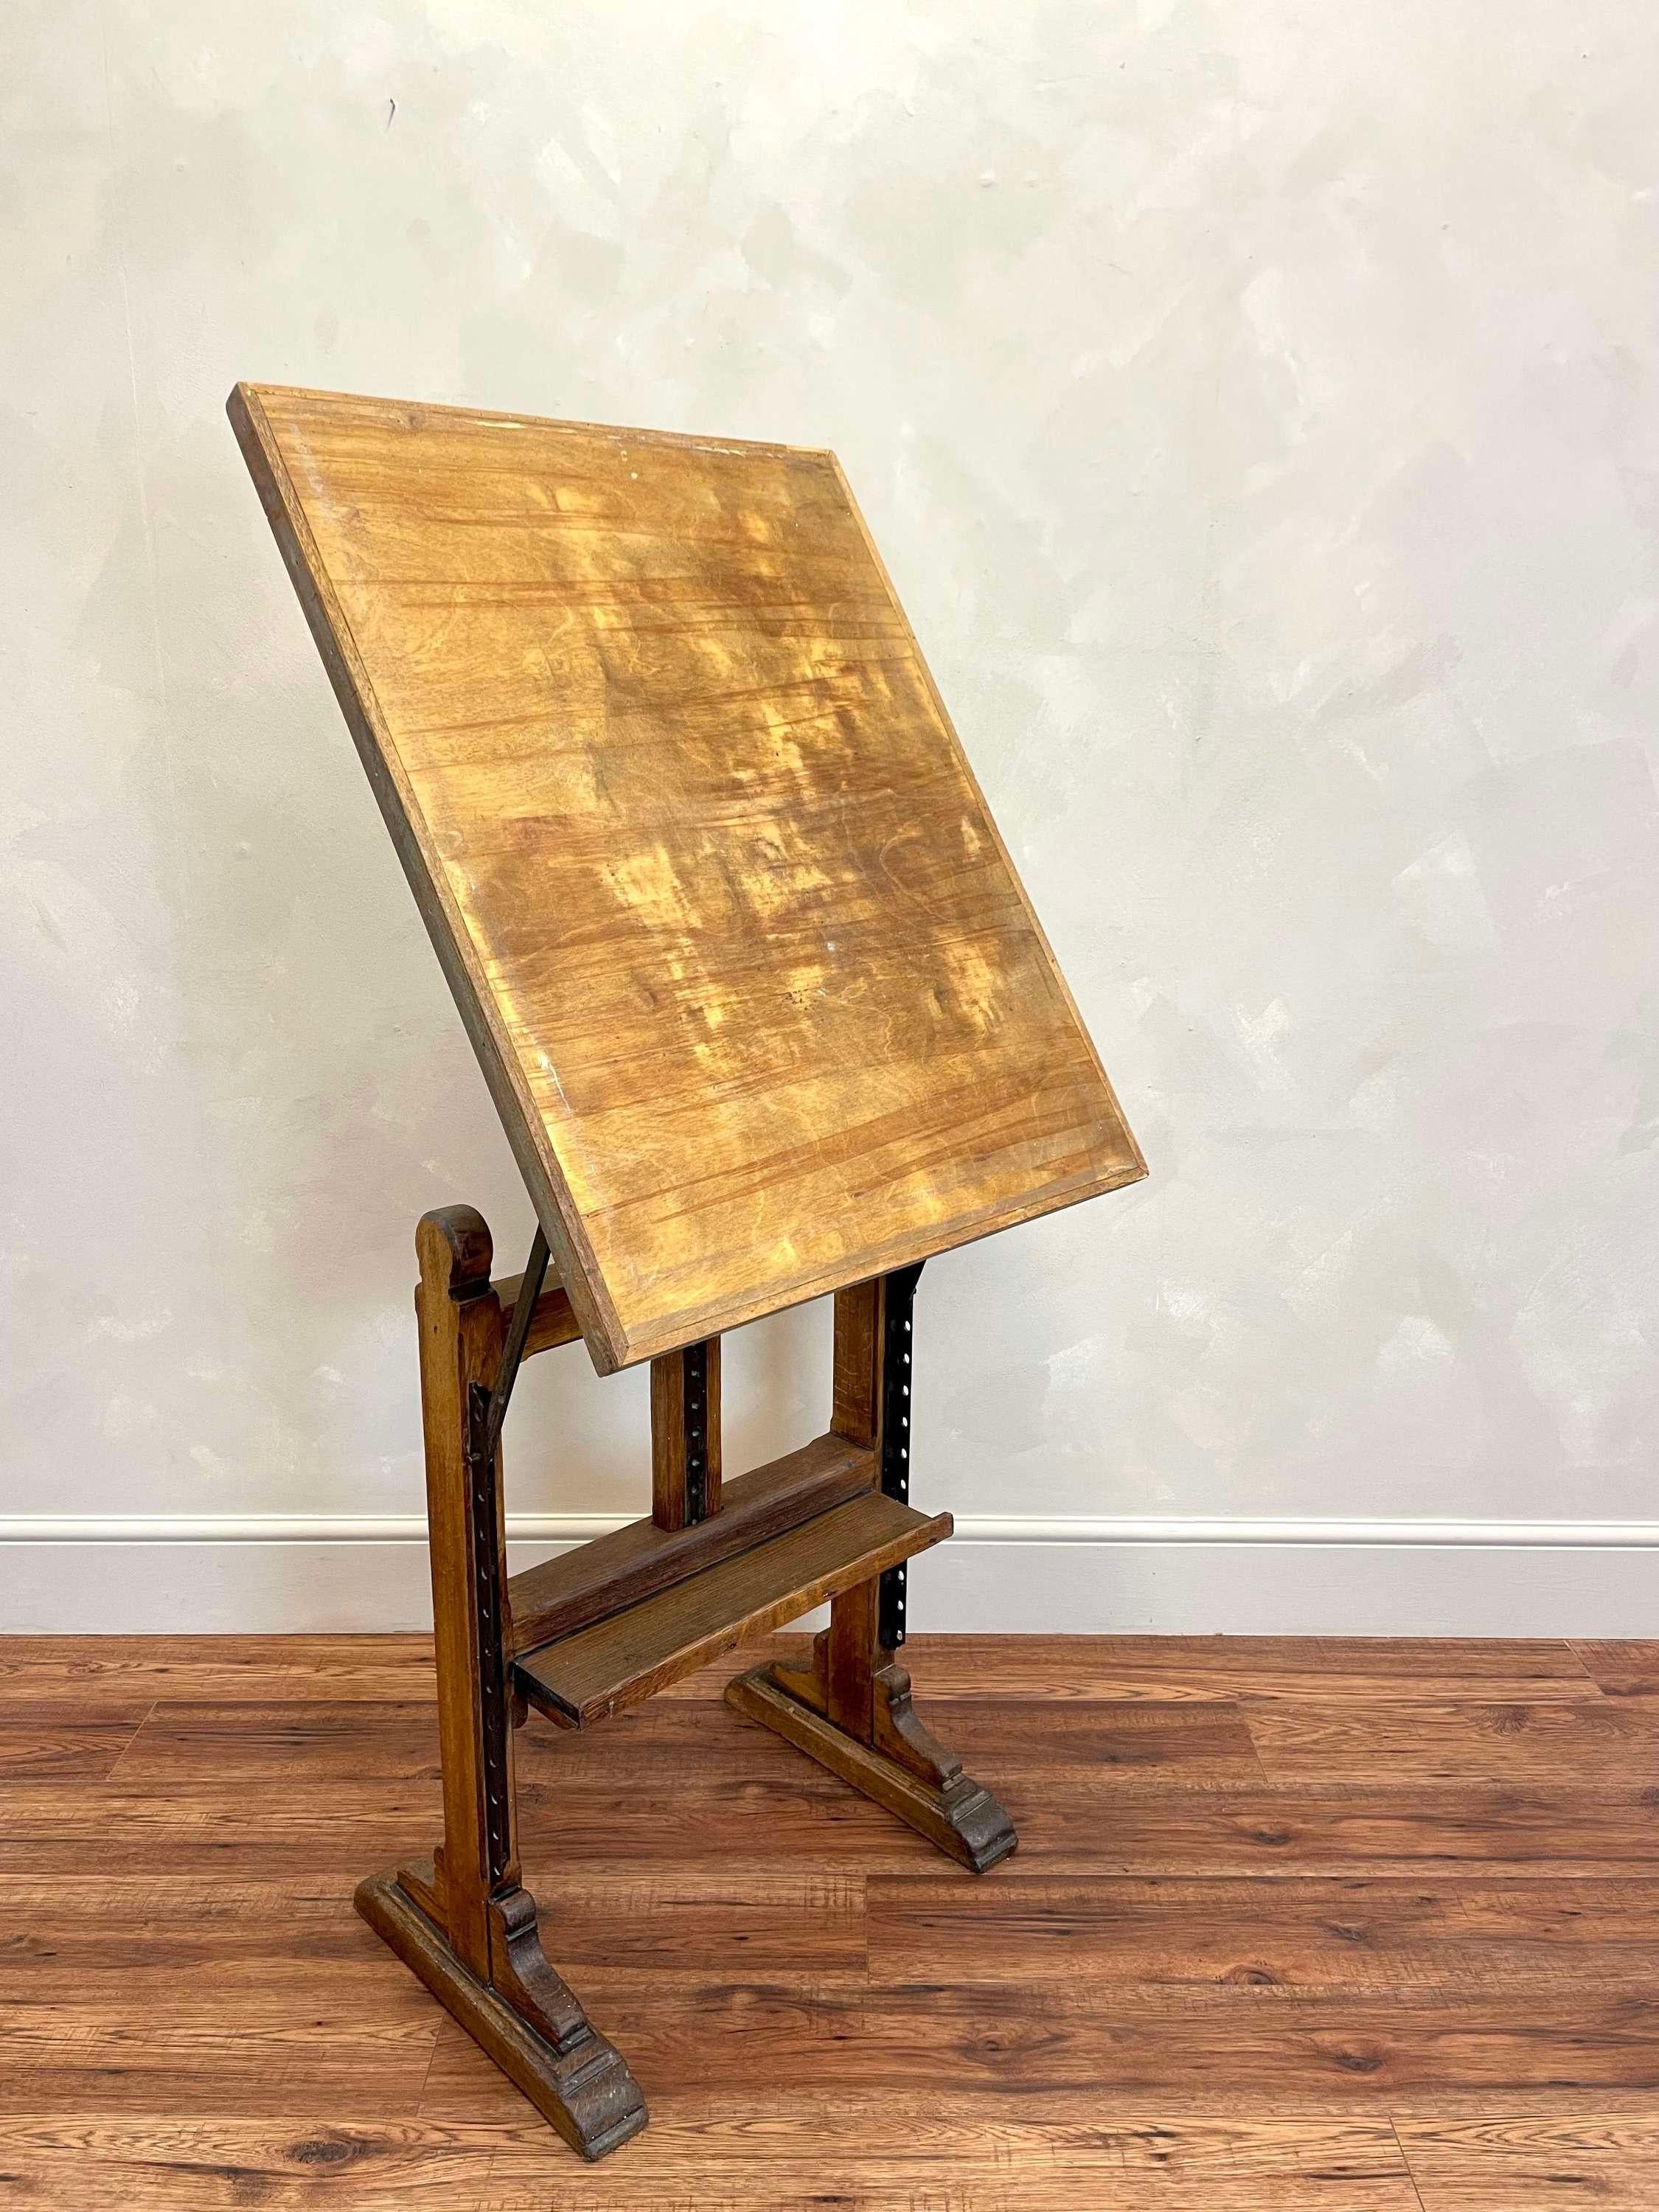 An early 20th century English oak Architect's/Artist's easel.
Probably by C Robertson & Co who produced a large range of paints and equipment.
Their clients included Turner, William Morris , William De Morgan and Queen Victoria .
The top can be